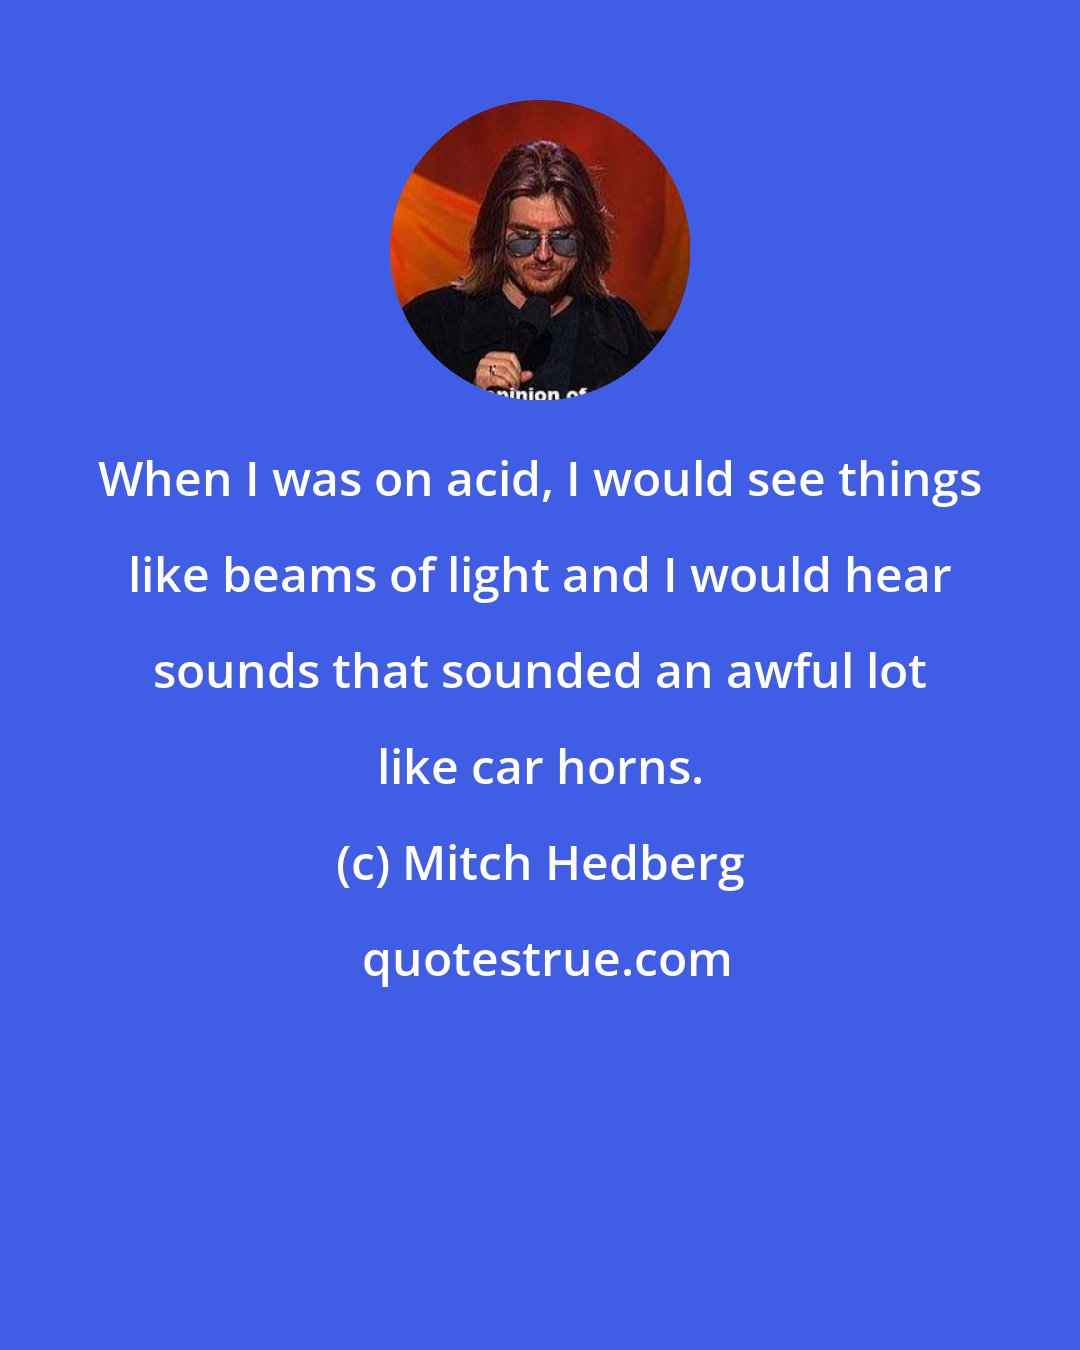 Mitch Hedberg: When I was on acid, I would see things like beams of light and I would hear sounds that sounded an awful lot like car horns.